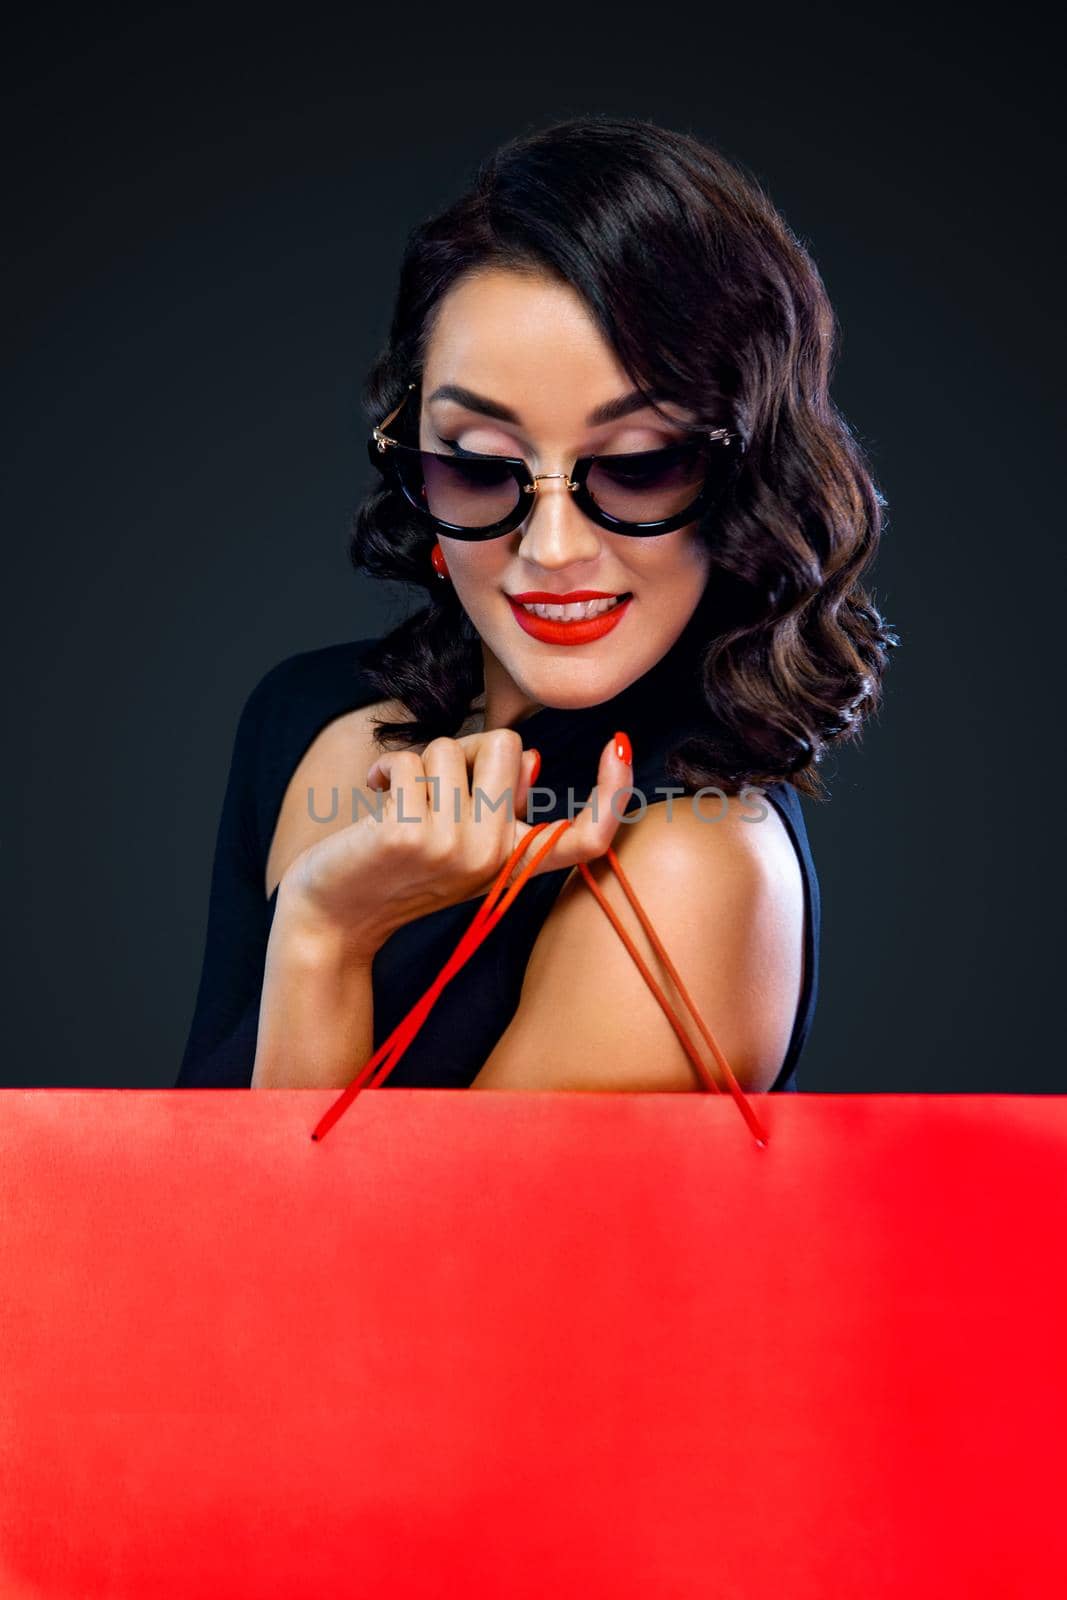 Black Friday sale concept for shop. Shopping woman in sunglasses holding red bag isolated on dark background. by MikeOrlov